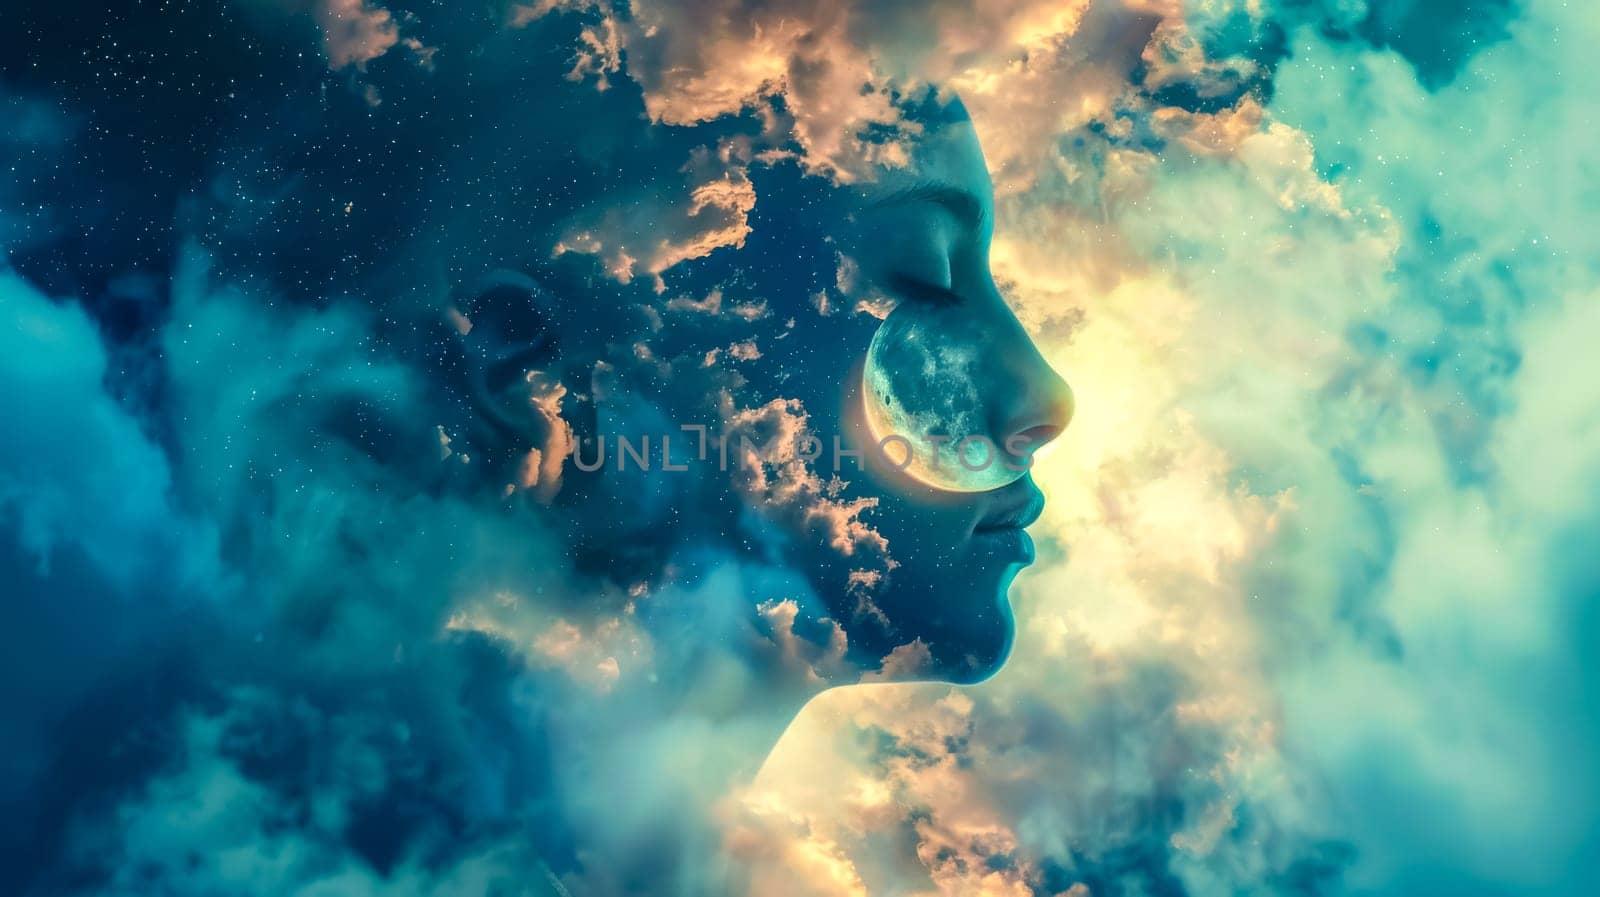 Surreal artwork combining a woman's profile with a cosmic cloudscape